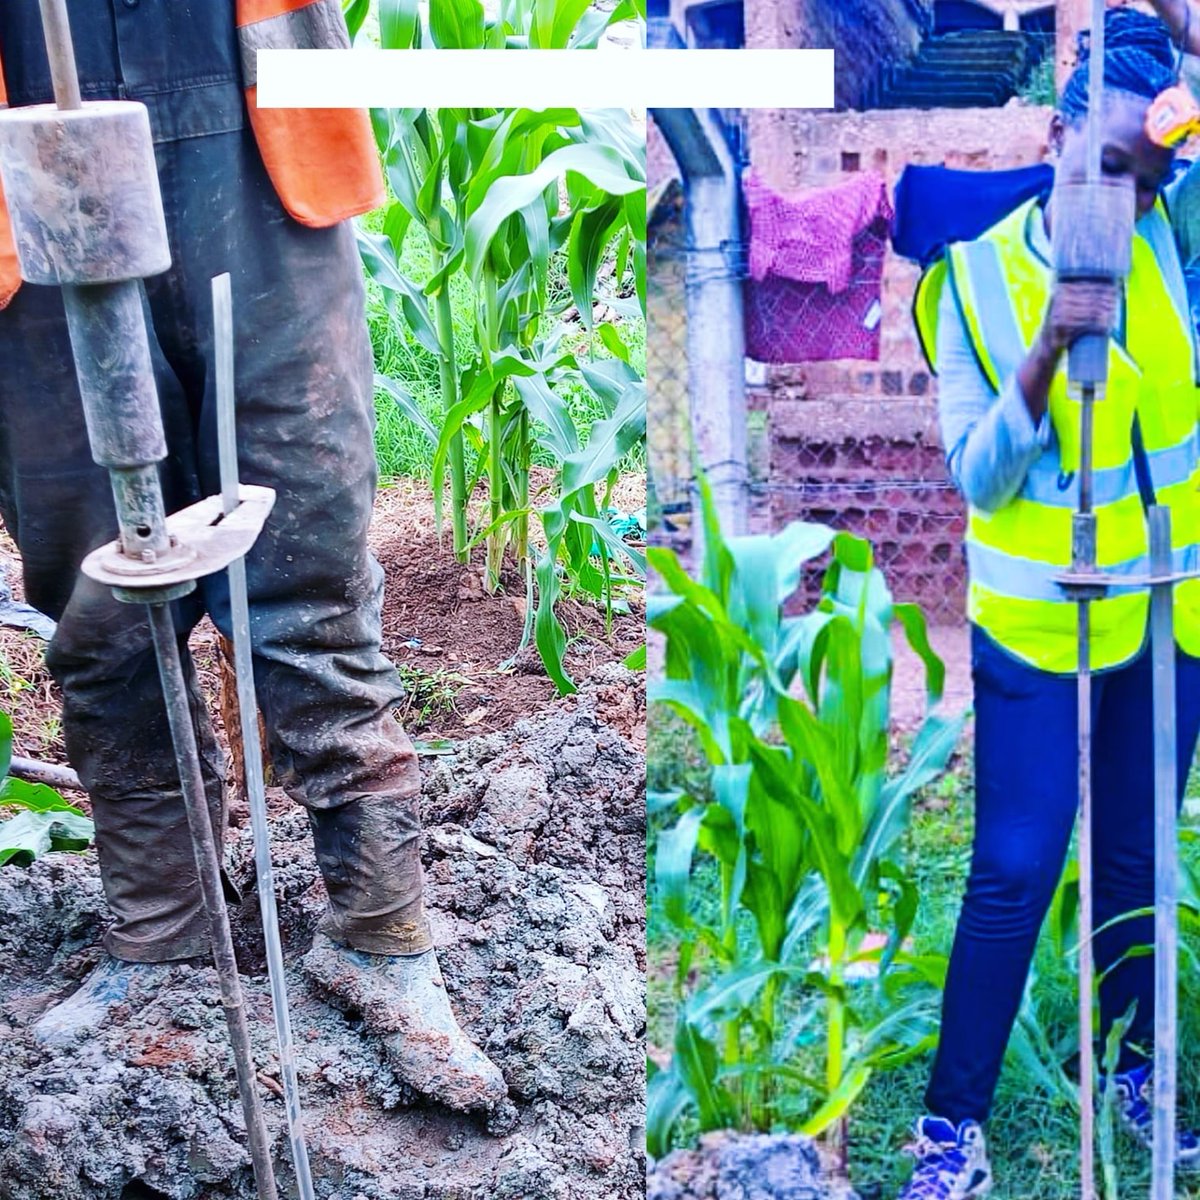 Uncovering soil strength, one penetration at a time!

For soil tests, call us:
+256 770 836 731
ORESOIL

#geotechnicalengineer #uganda #soiltests #geo #soilstrength #construction #constructionlife #building #design #construction #architect #interiordesign #renovation #engineering